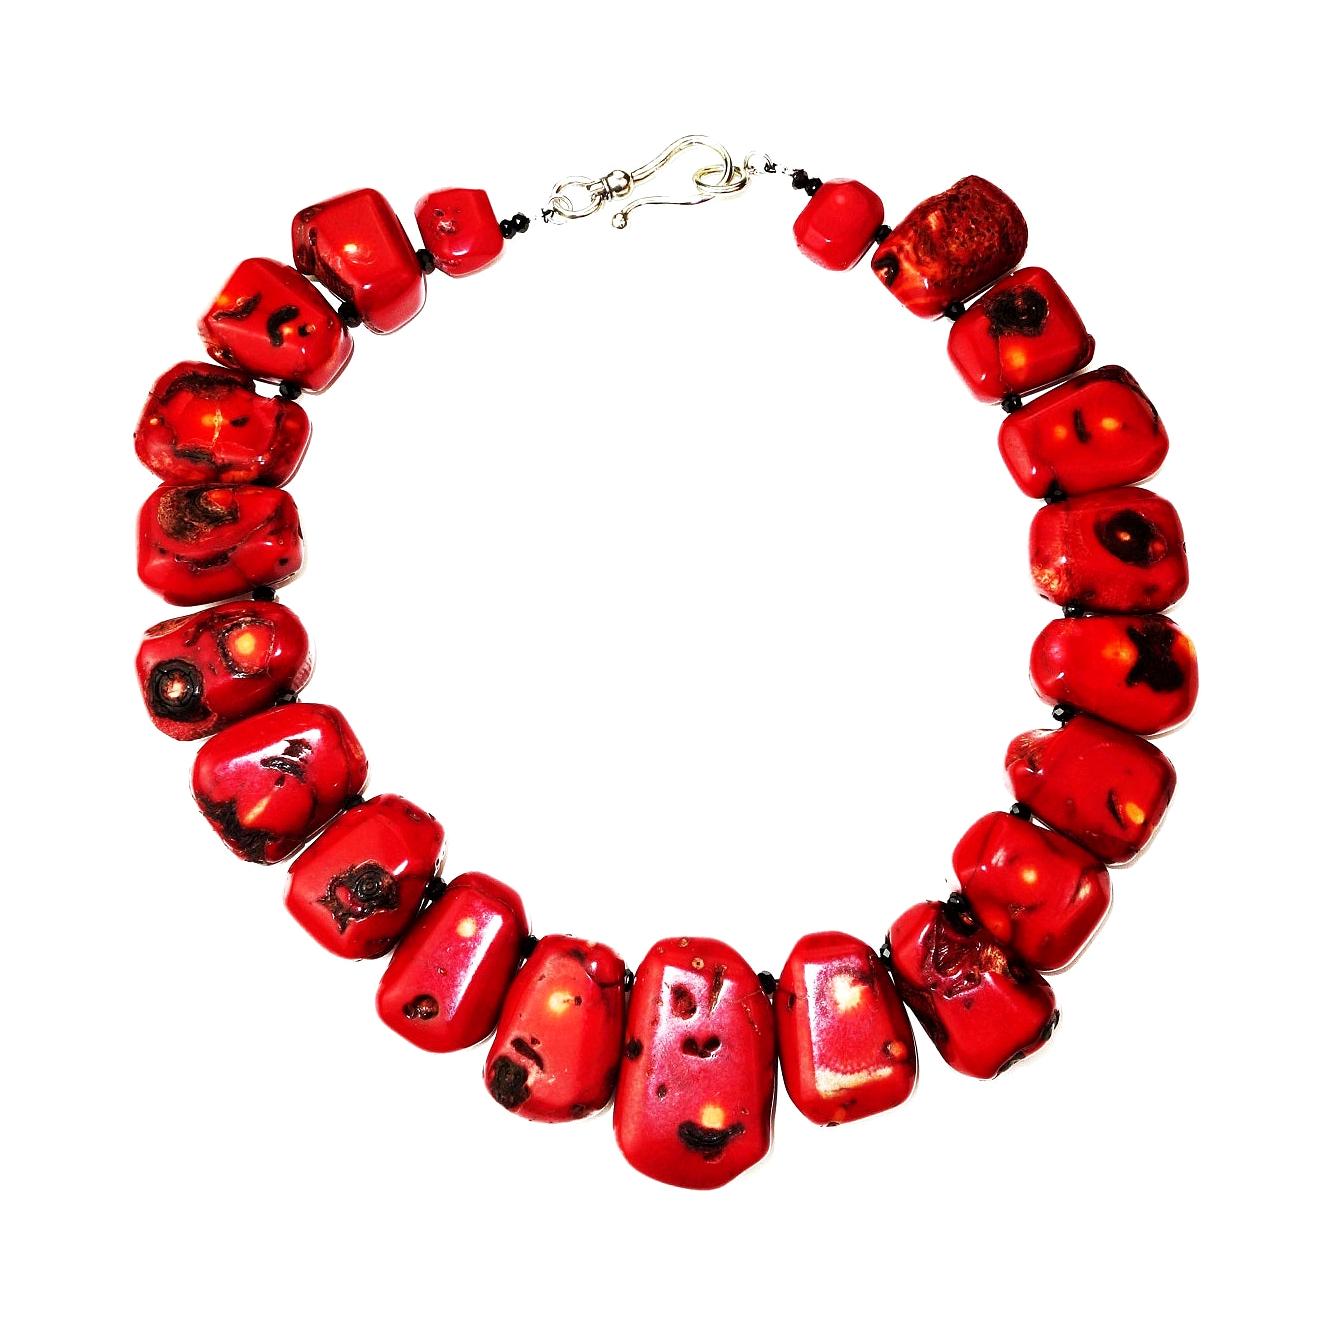 Gorgeous, handmade Deep Red Coral with distinctive black markings necklace. The bamboo coral ranges in length from 27mm to 43mm. The individual bamboo corals are accented with faceted black Spinel. This unique necklace is secured with a Sterling